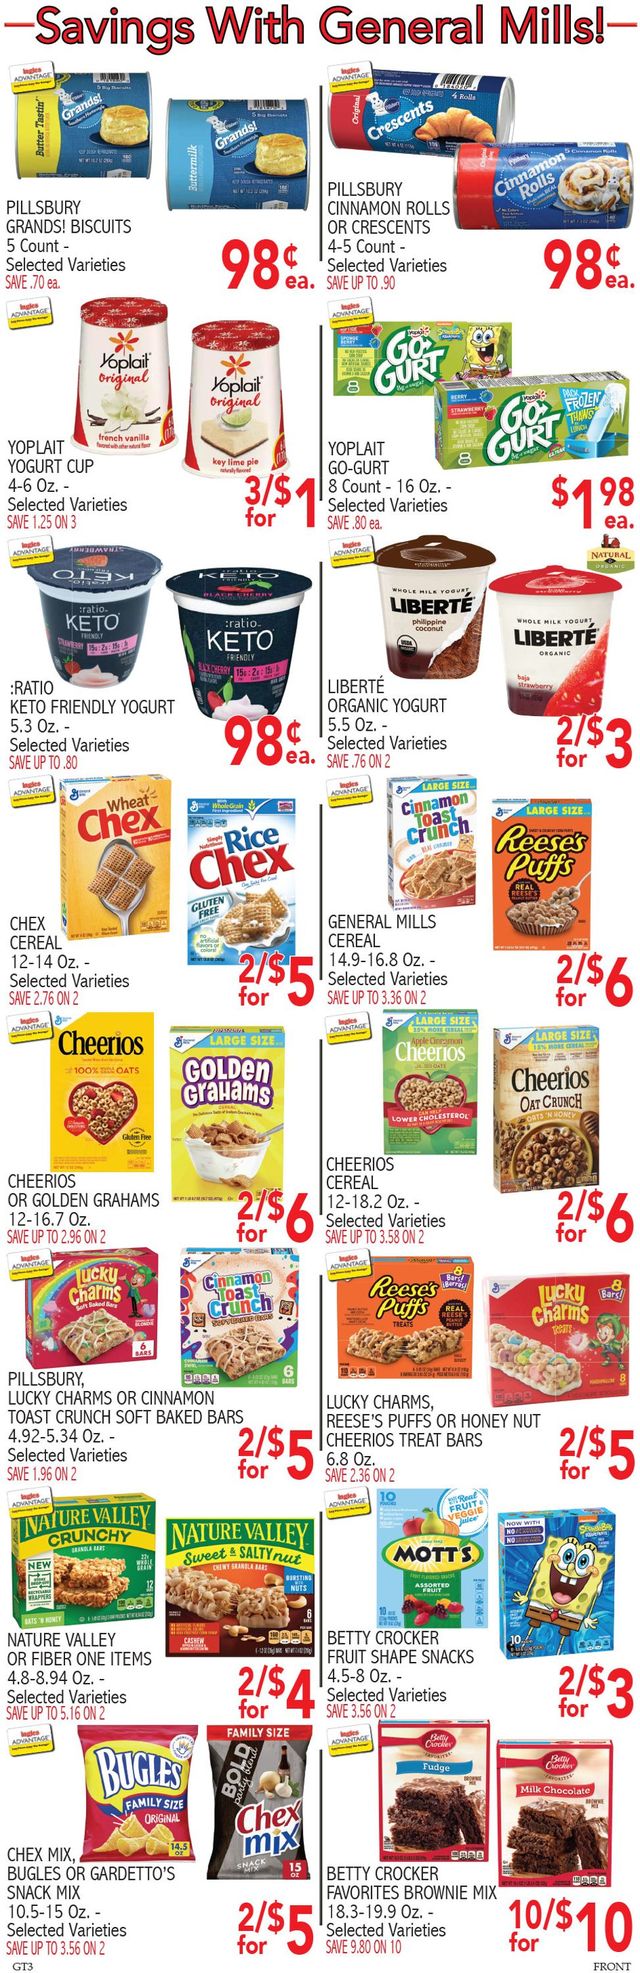 Ingles Ad from 05/12/2021